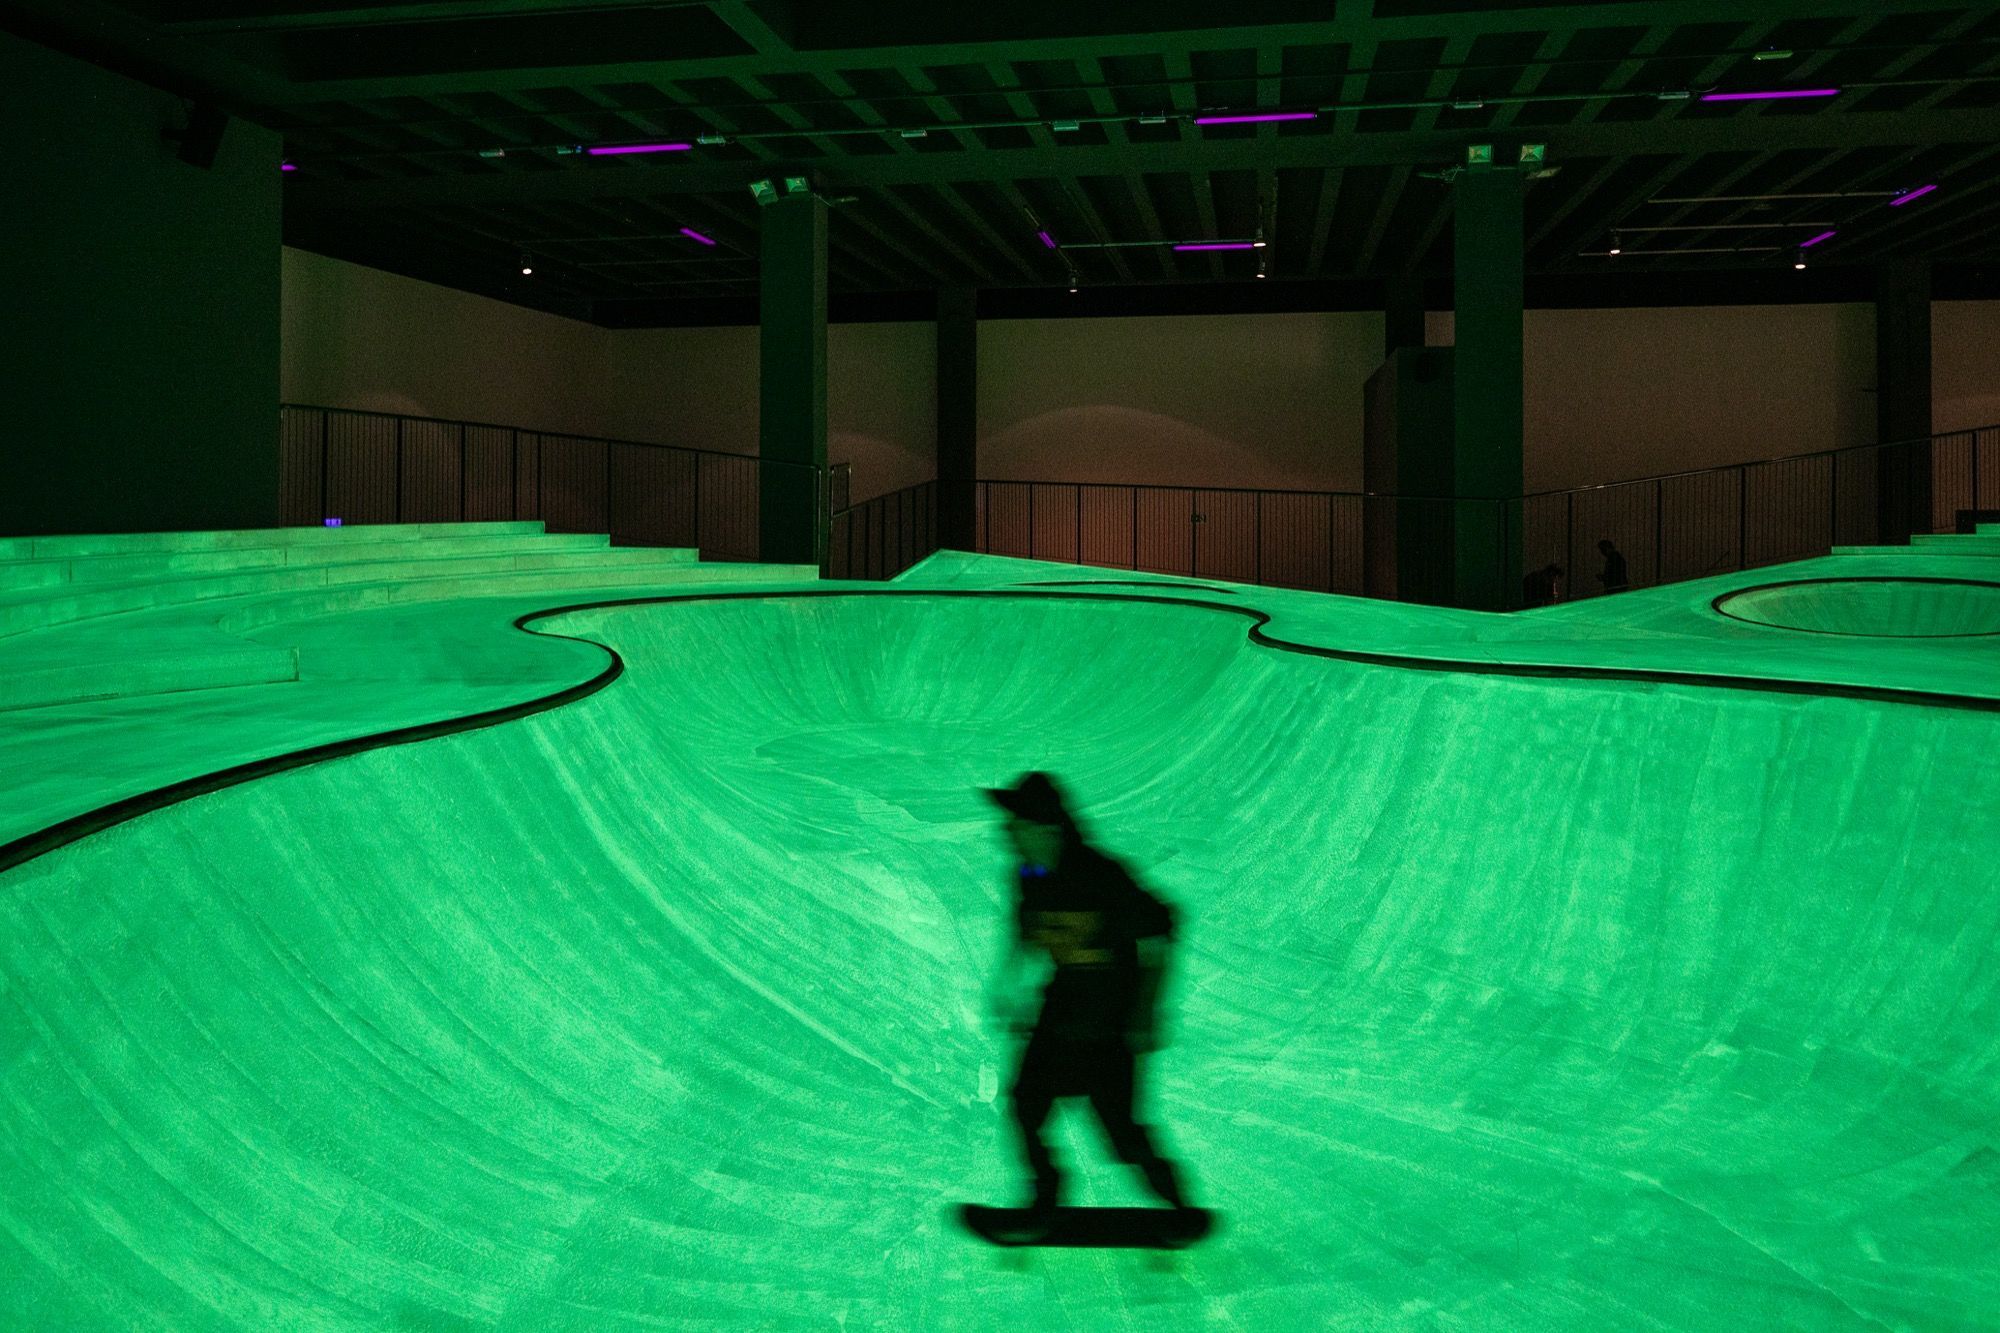 A real skate park at the Triennale di Milano Koo Jeong A's latest work will inaugurate today and will be open to the public